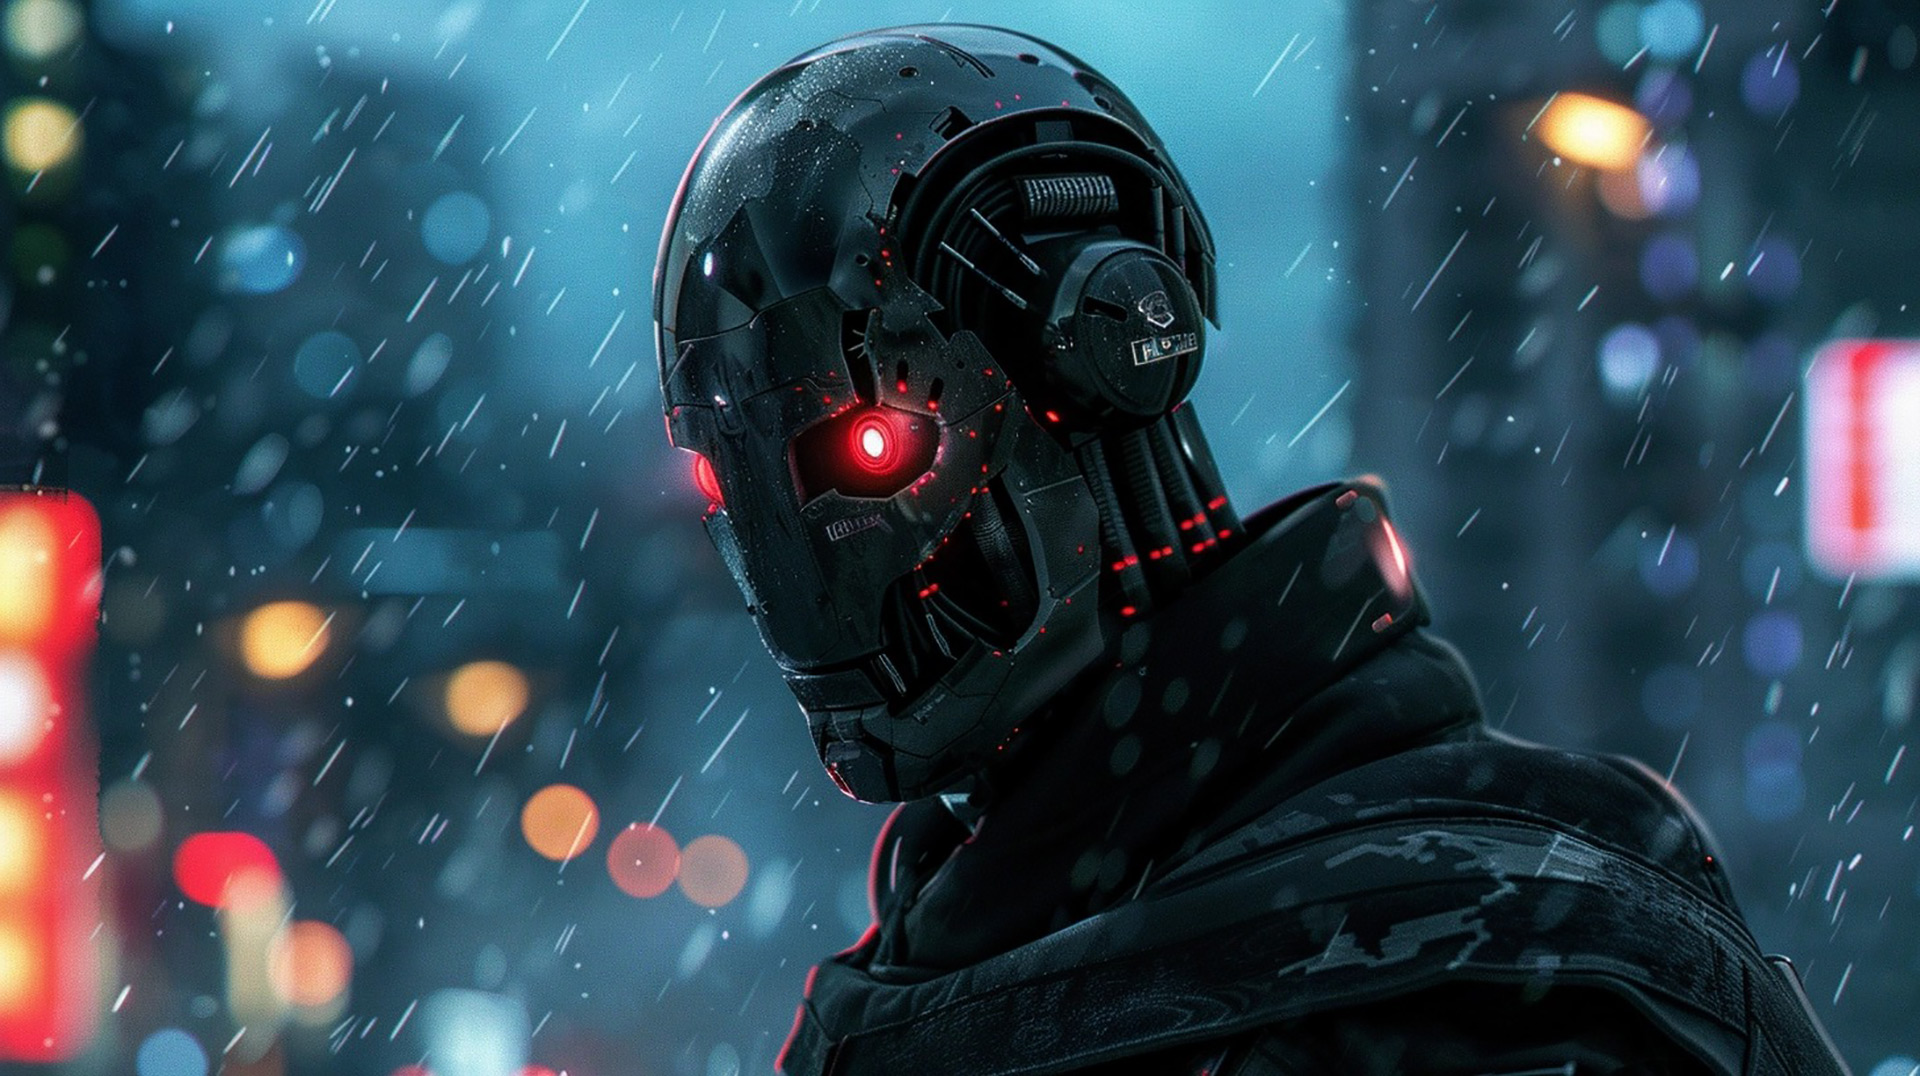 Cyber Crime Bosses: Futuristic Robot Gangster Wallpapers in HD